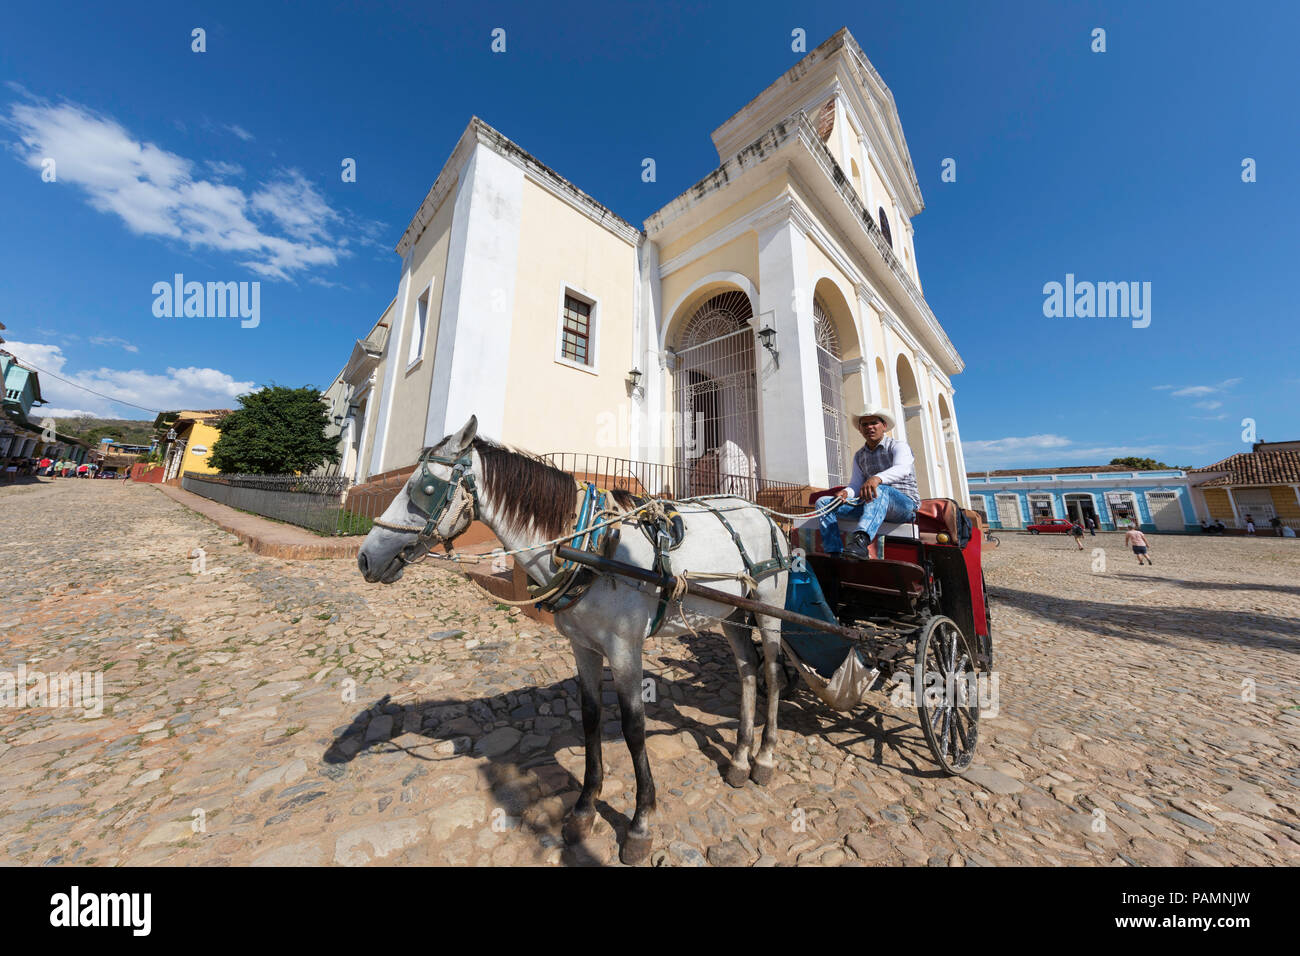 A horse-drawn cart known locally as a coche in Plaza Mayor, in the UNESCO World Heritage town of Trinidad, Cuba. Stock Photo